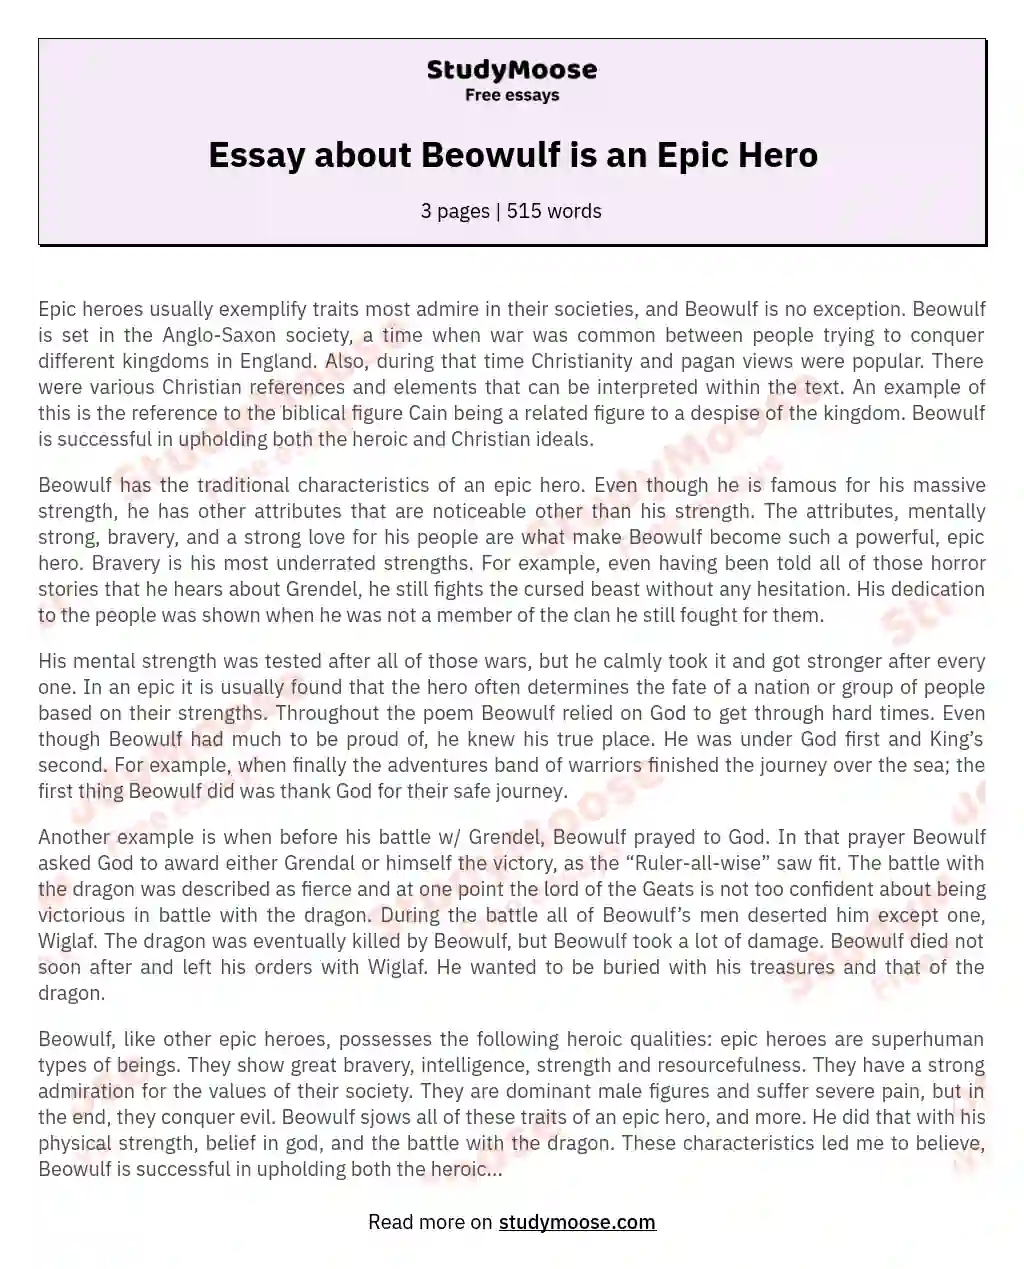 Essay about Beowulf is an Epic Hero